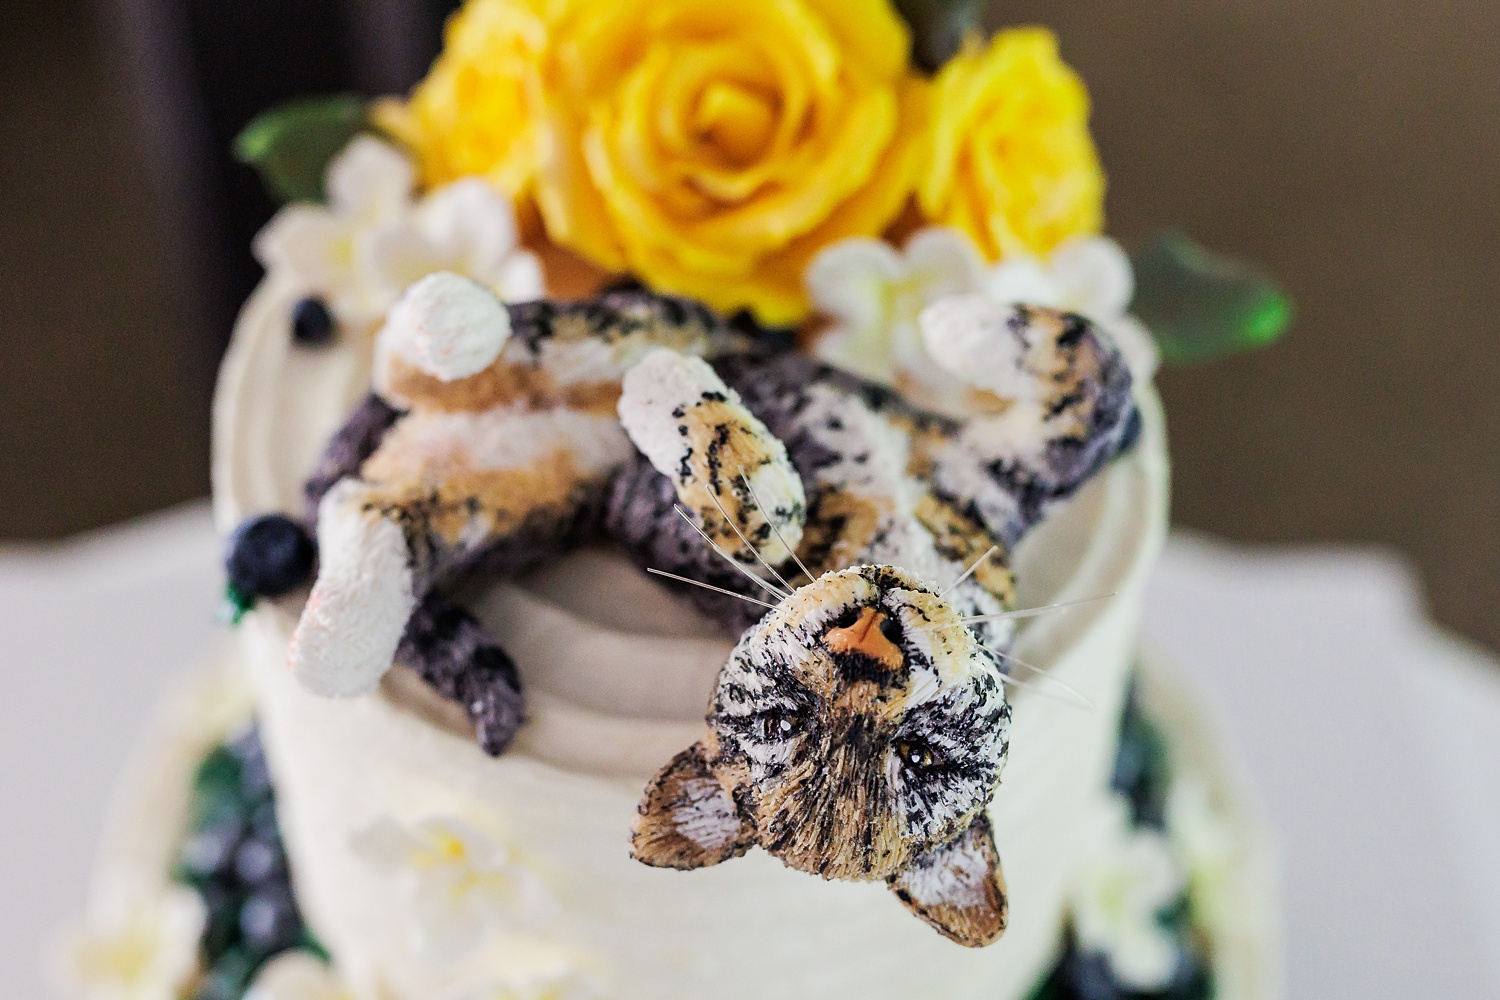 Wedding day cake featuring the couple's pets